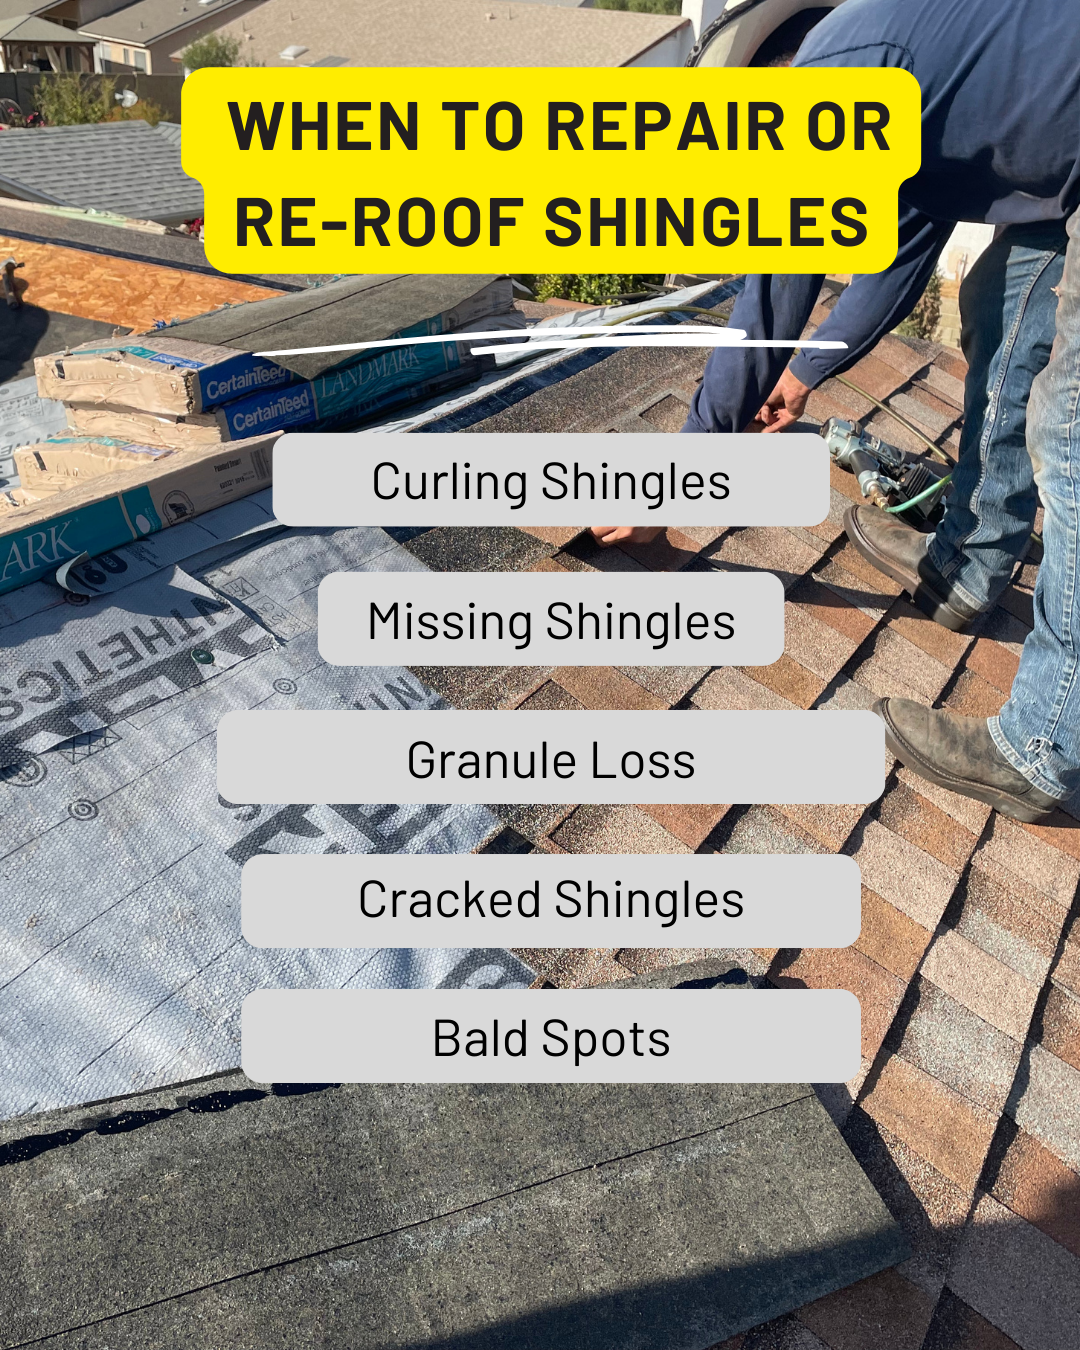 When to Repair or Re-roof Shingles